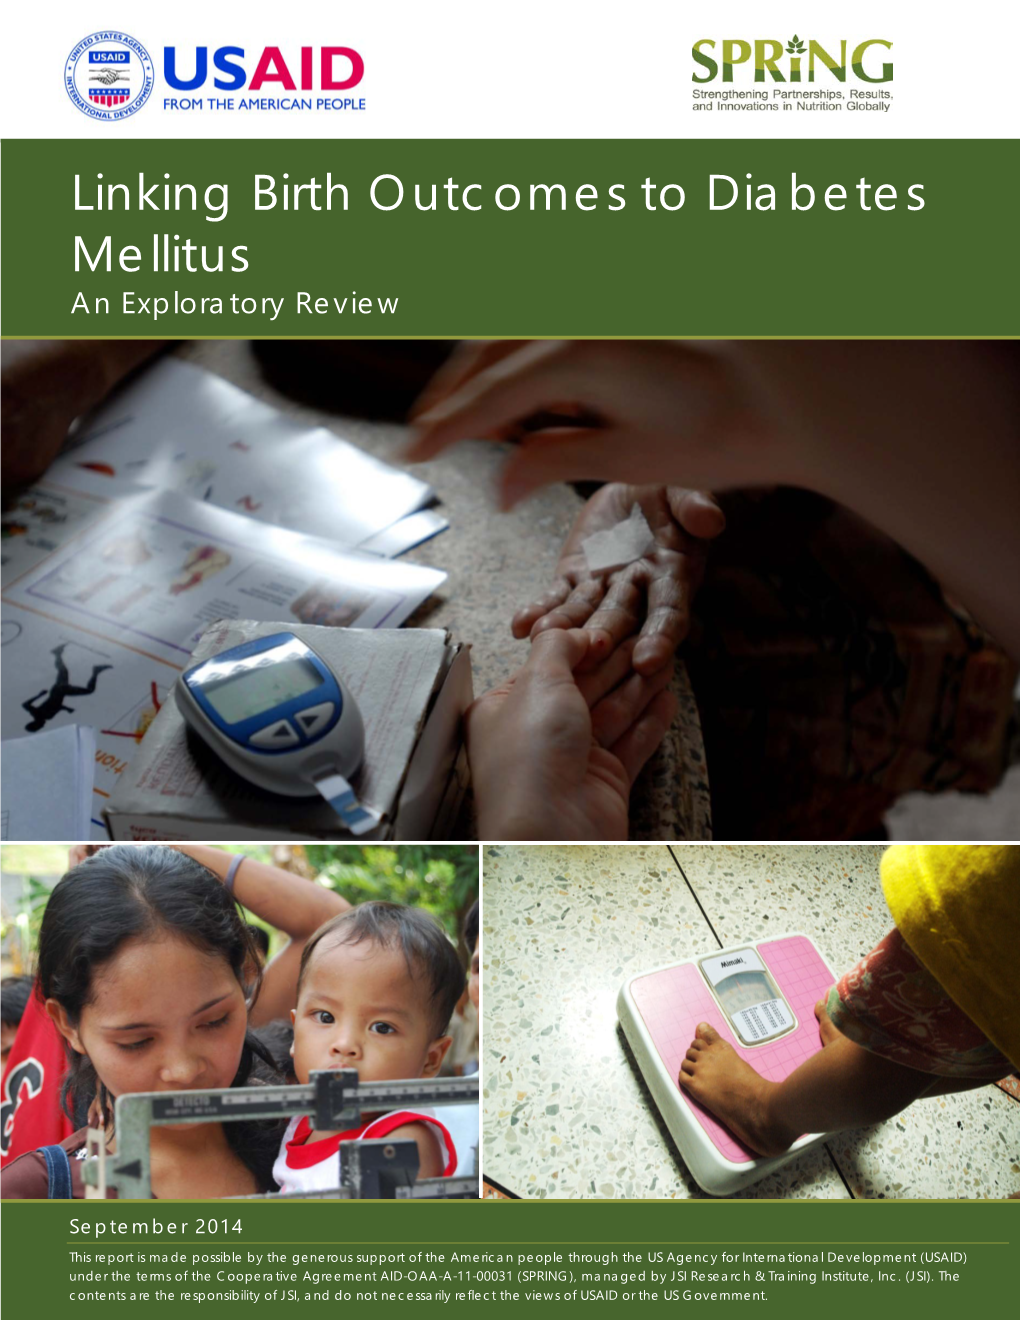 Linking Birth Outcomes to Diabetes Mellitus: and Exploratory Review